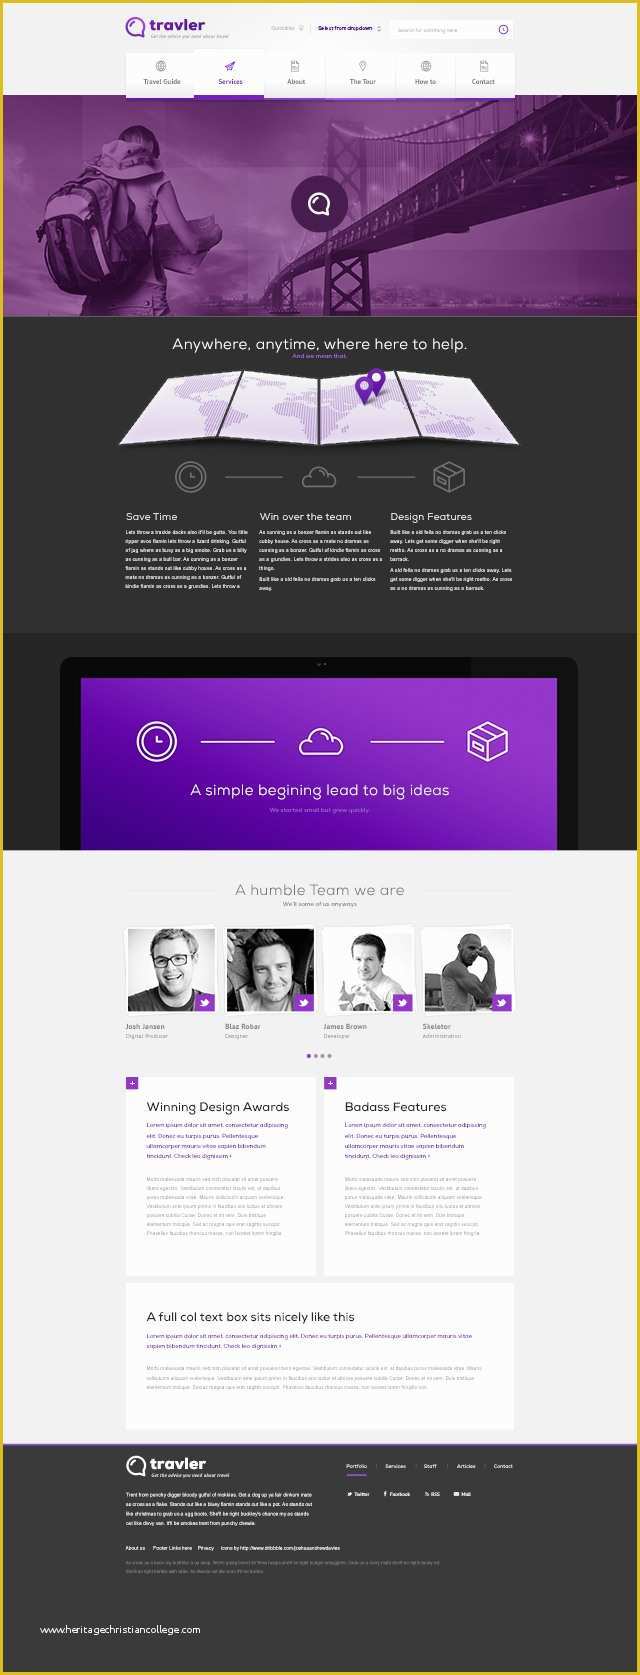 Responsive Website Templates Psd Free Download Of Responsive Psd Web Templates 25 Free Templates